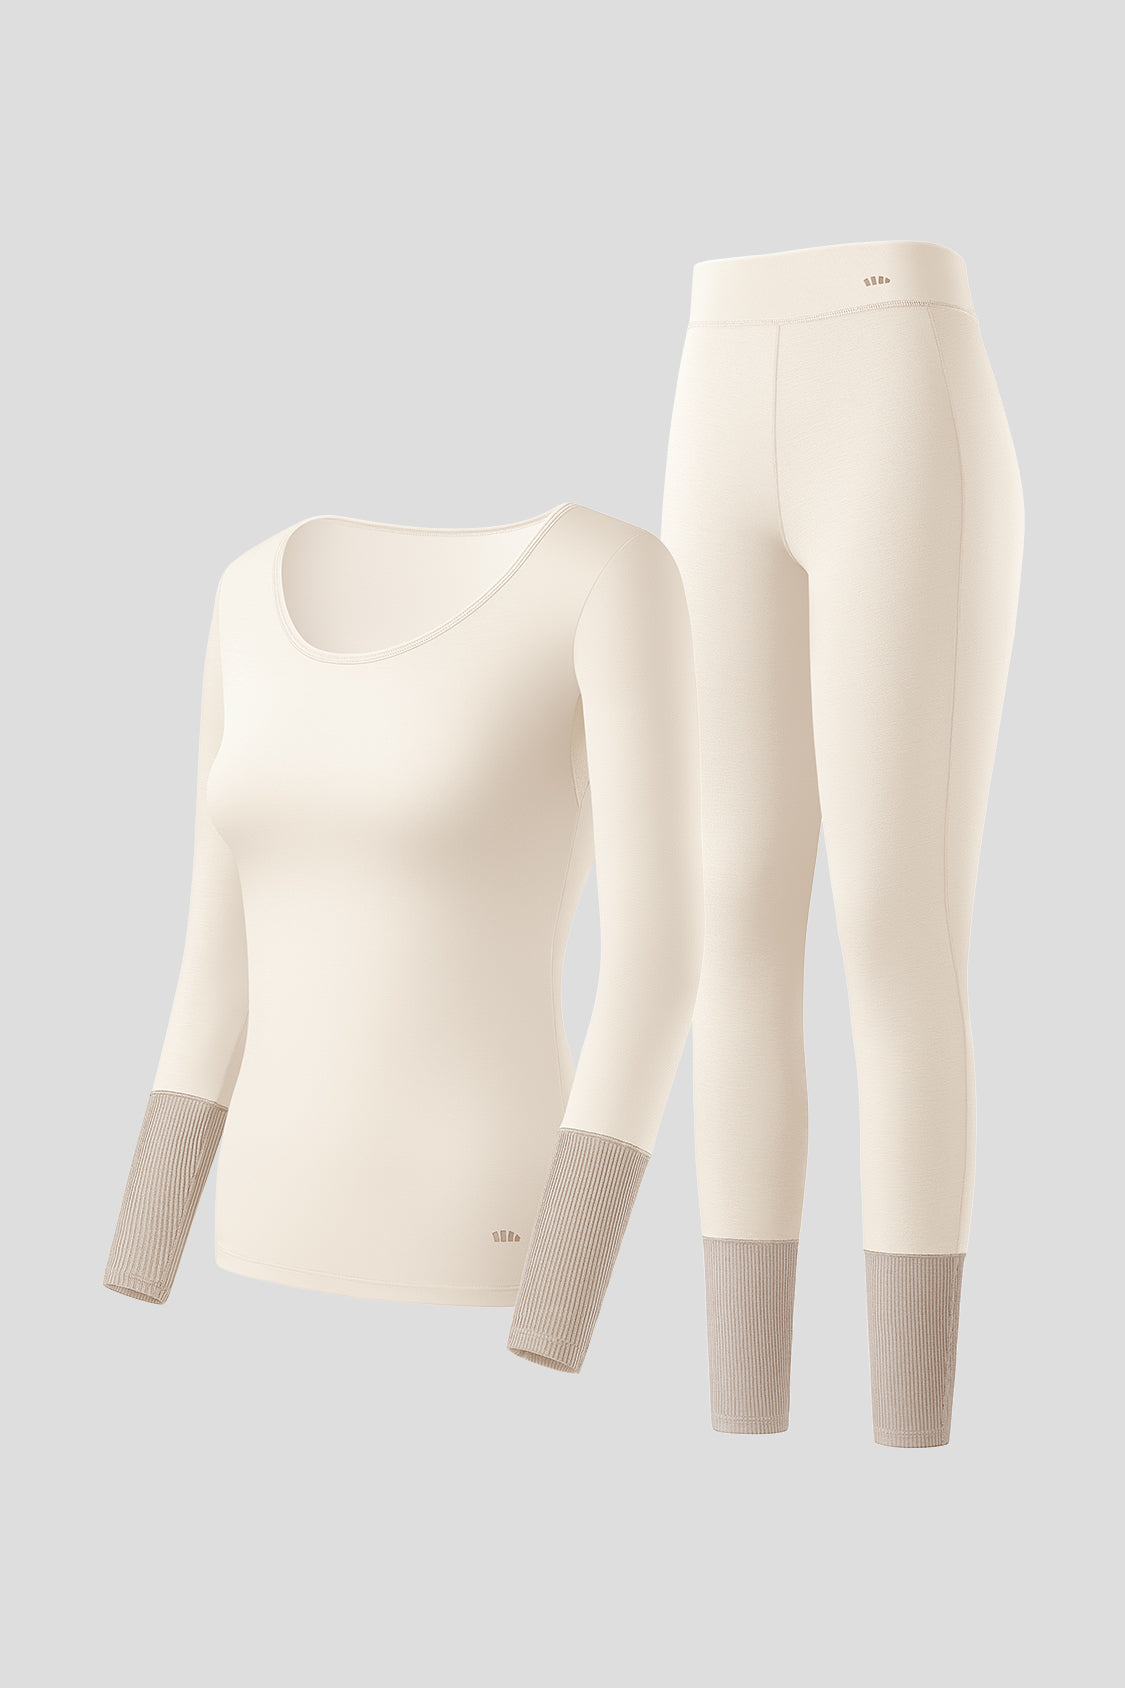 Thermal Underwear Women Plus Set 70% Silk And 30% Cotton Long Johns In  Sizes M XL SG381 201027 From Lu01, $37.87